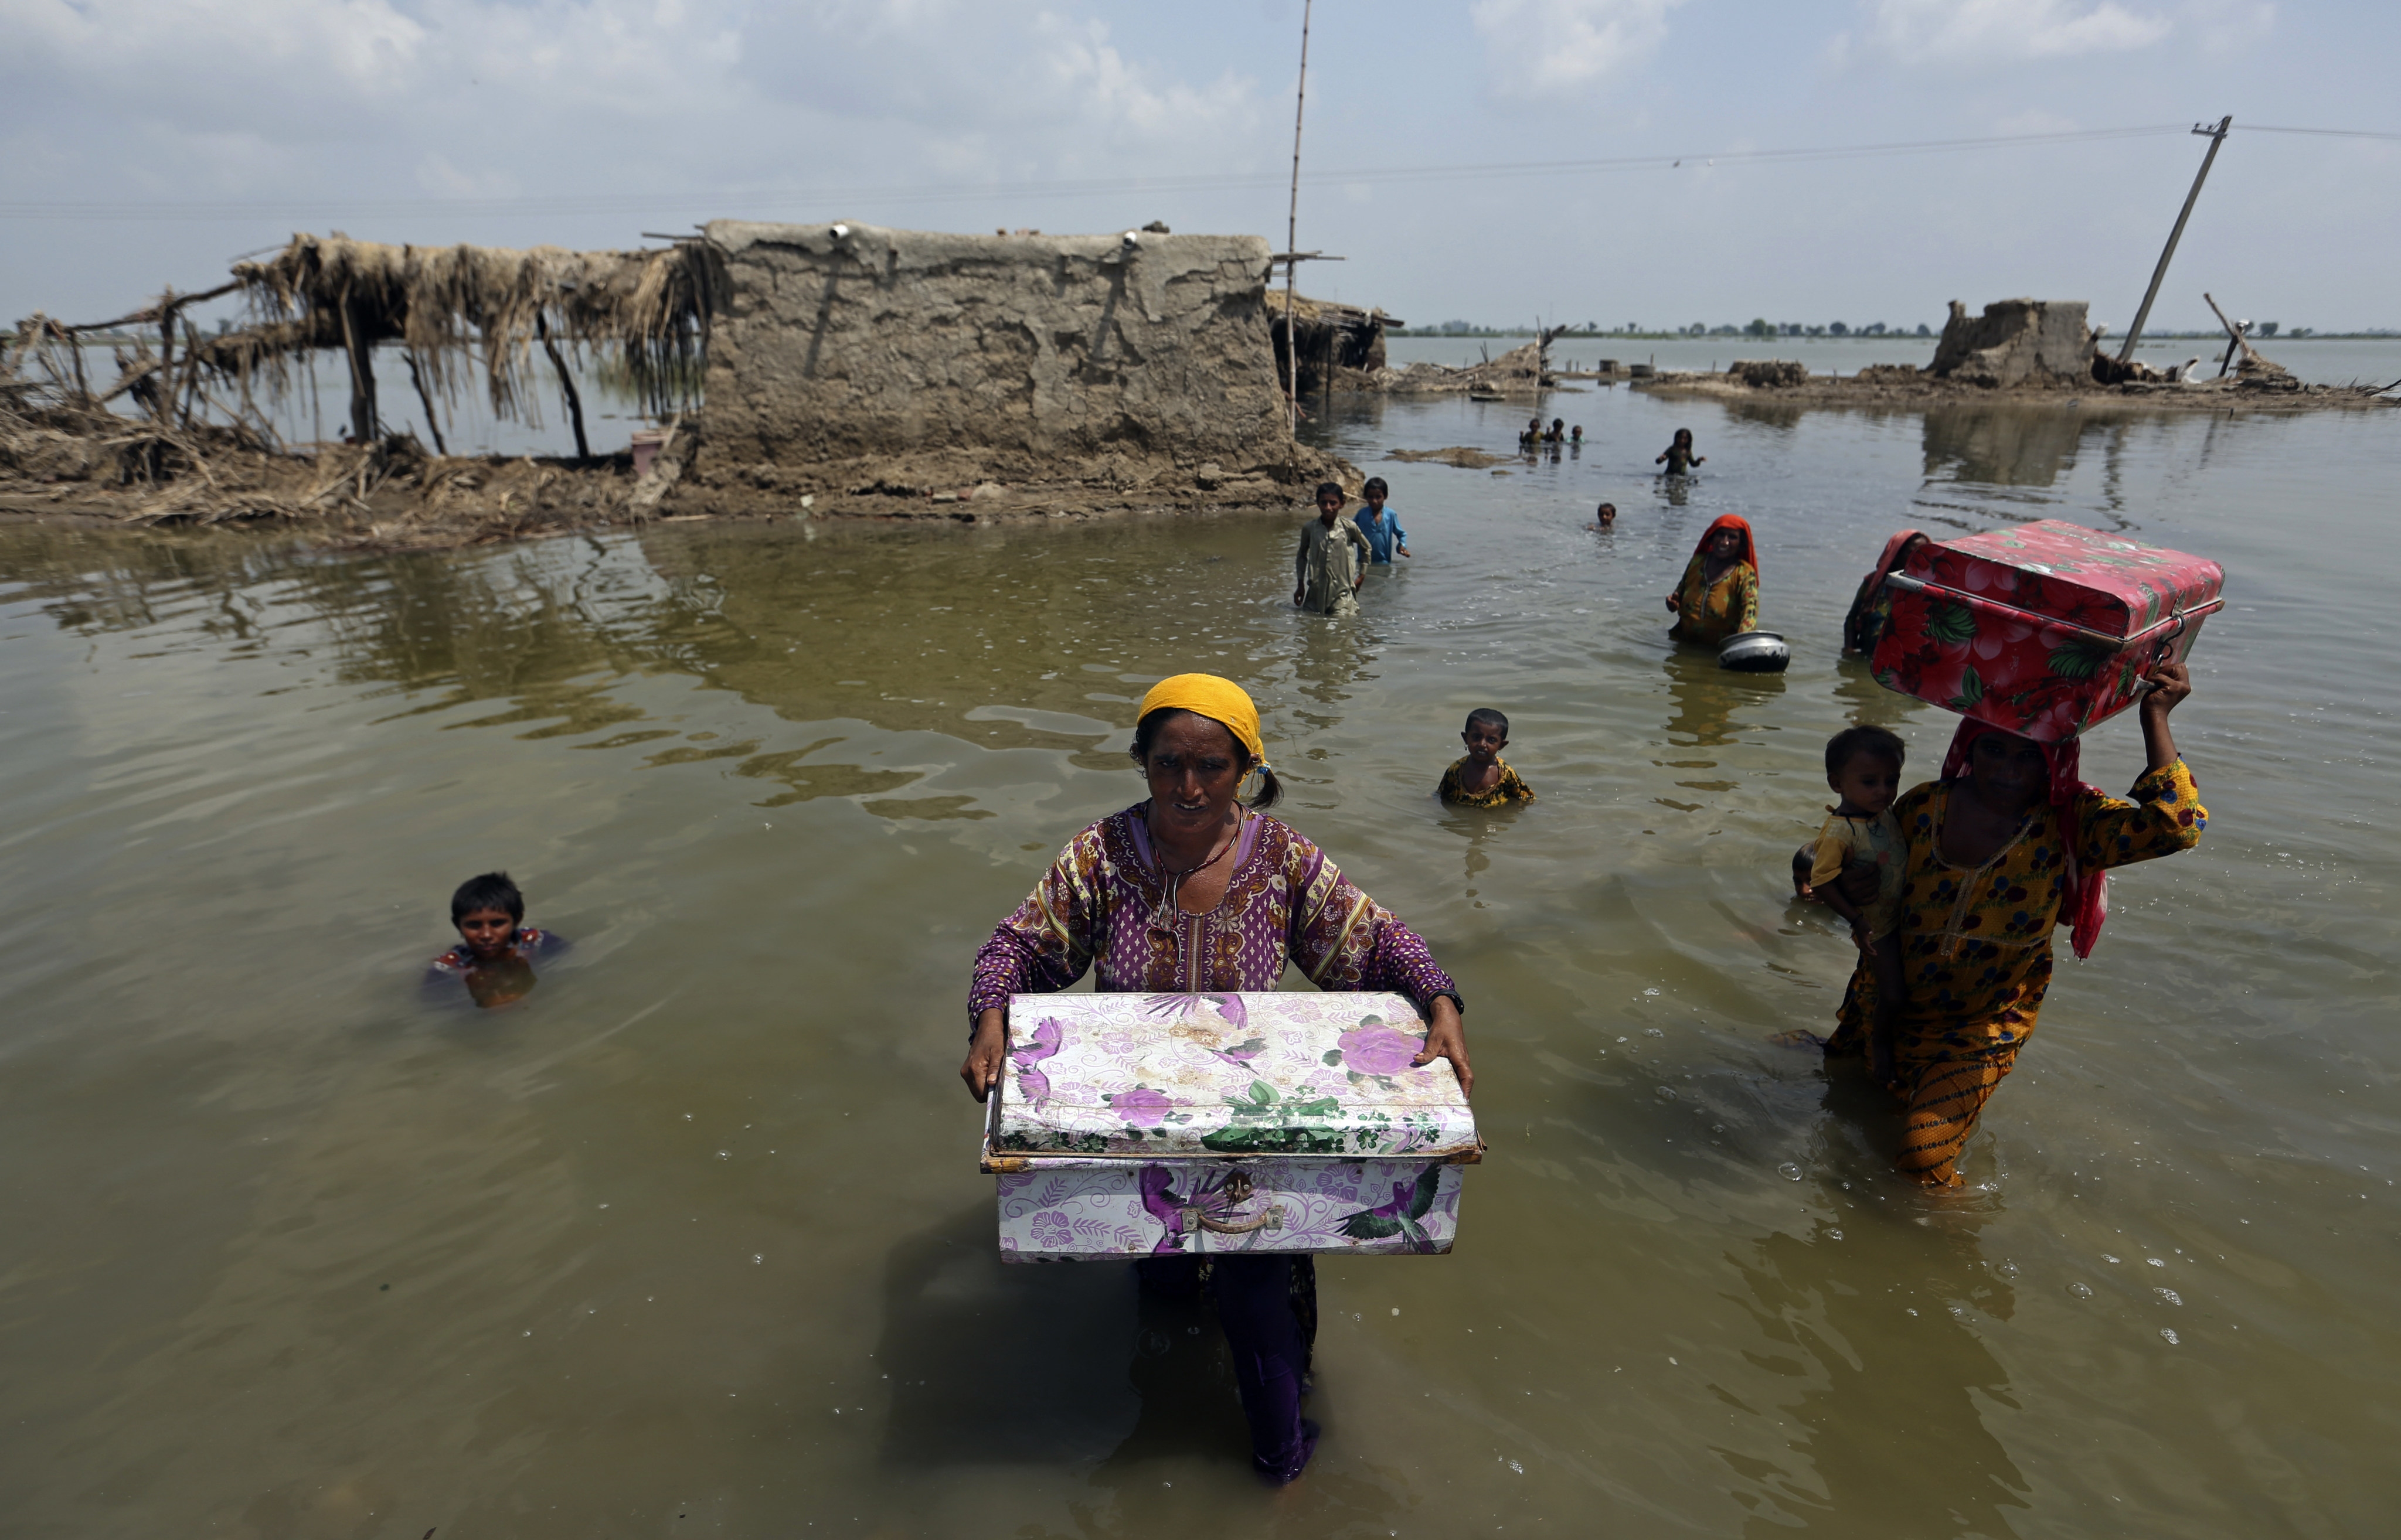 Women carry belongings salvaged from their flooded home after monsoon rains in the Qambar Shahdadkot district of Sindh province in Pakistan on September 6. Photo: AP